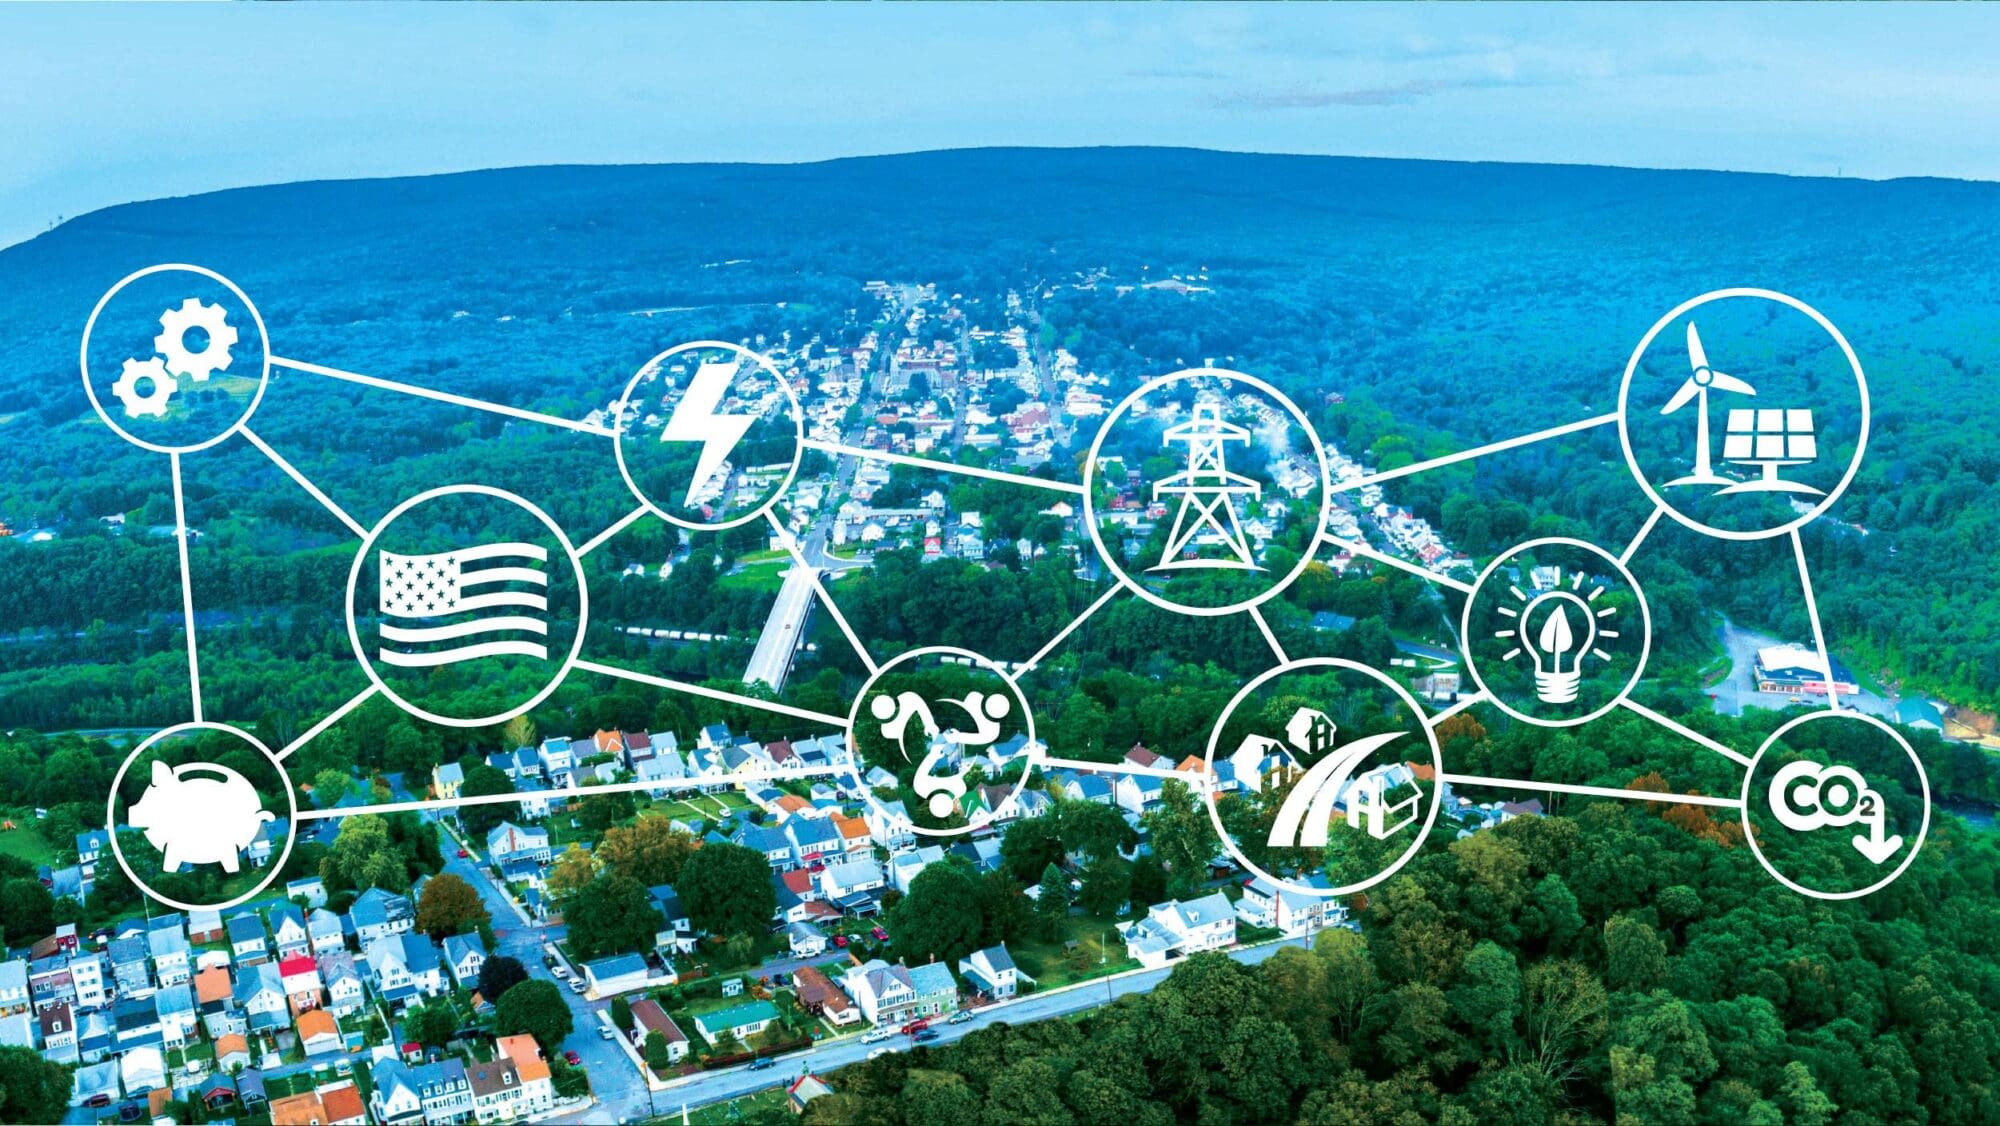 Aerial view of hillside, with a graphic overlaid showing a playful view of the energy cycle, from power plant or renewable source to power line.